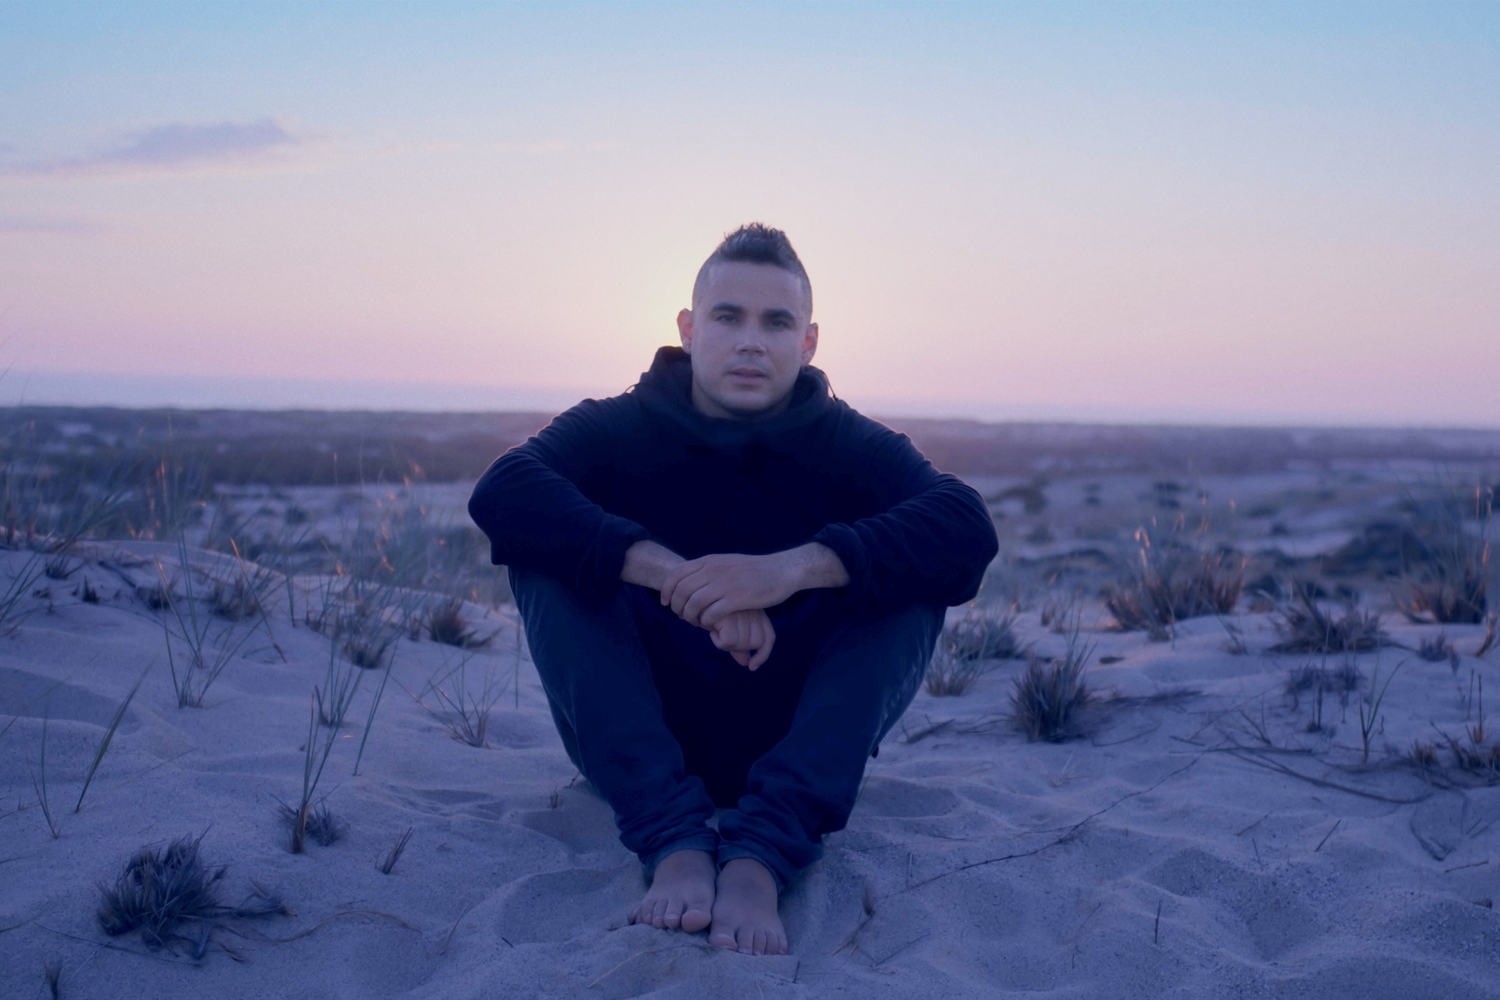 Rostam releases new single ‘Unfold You’